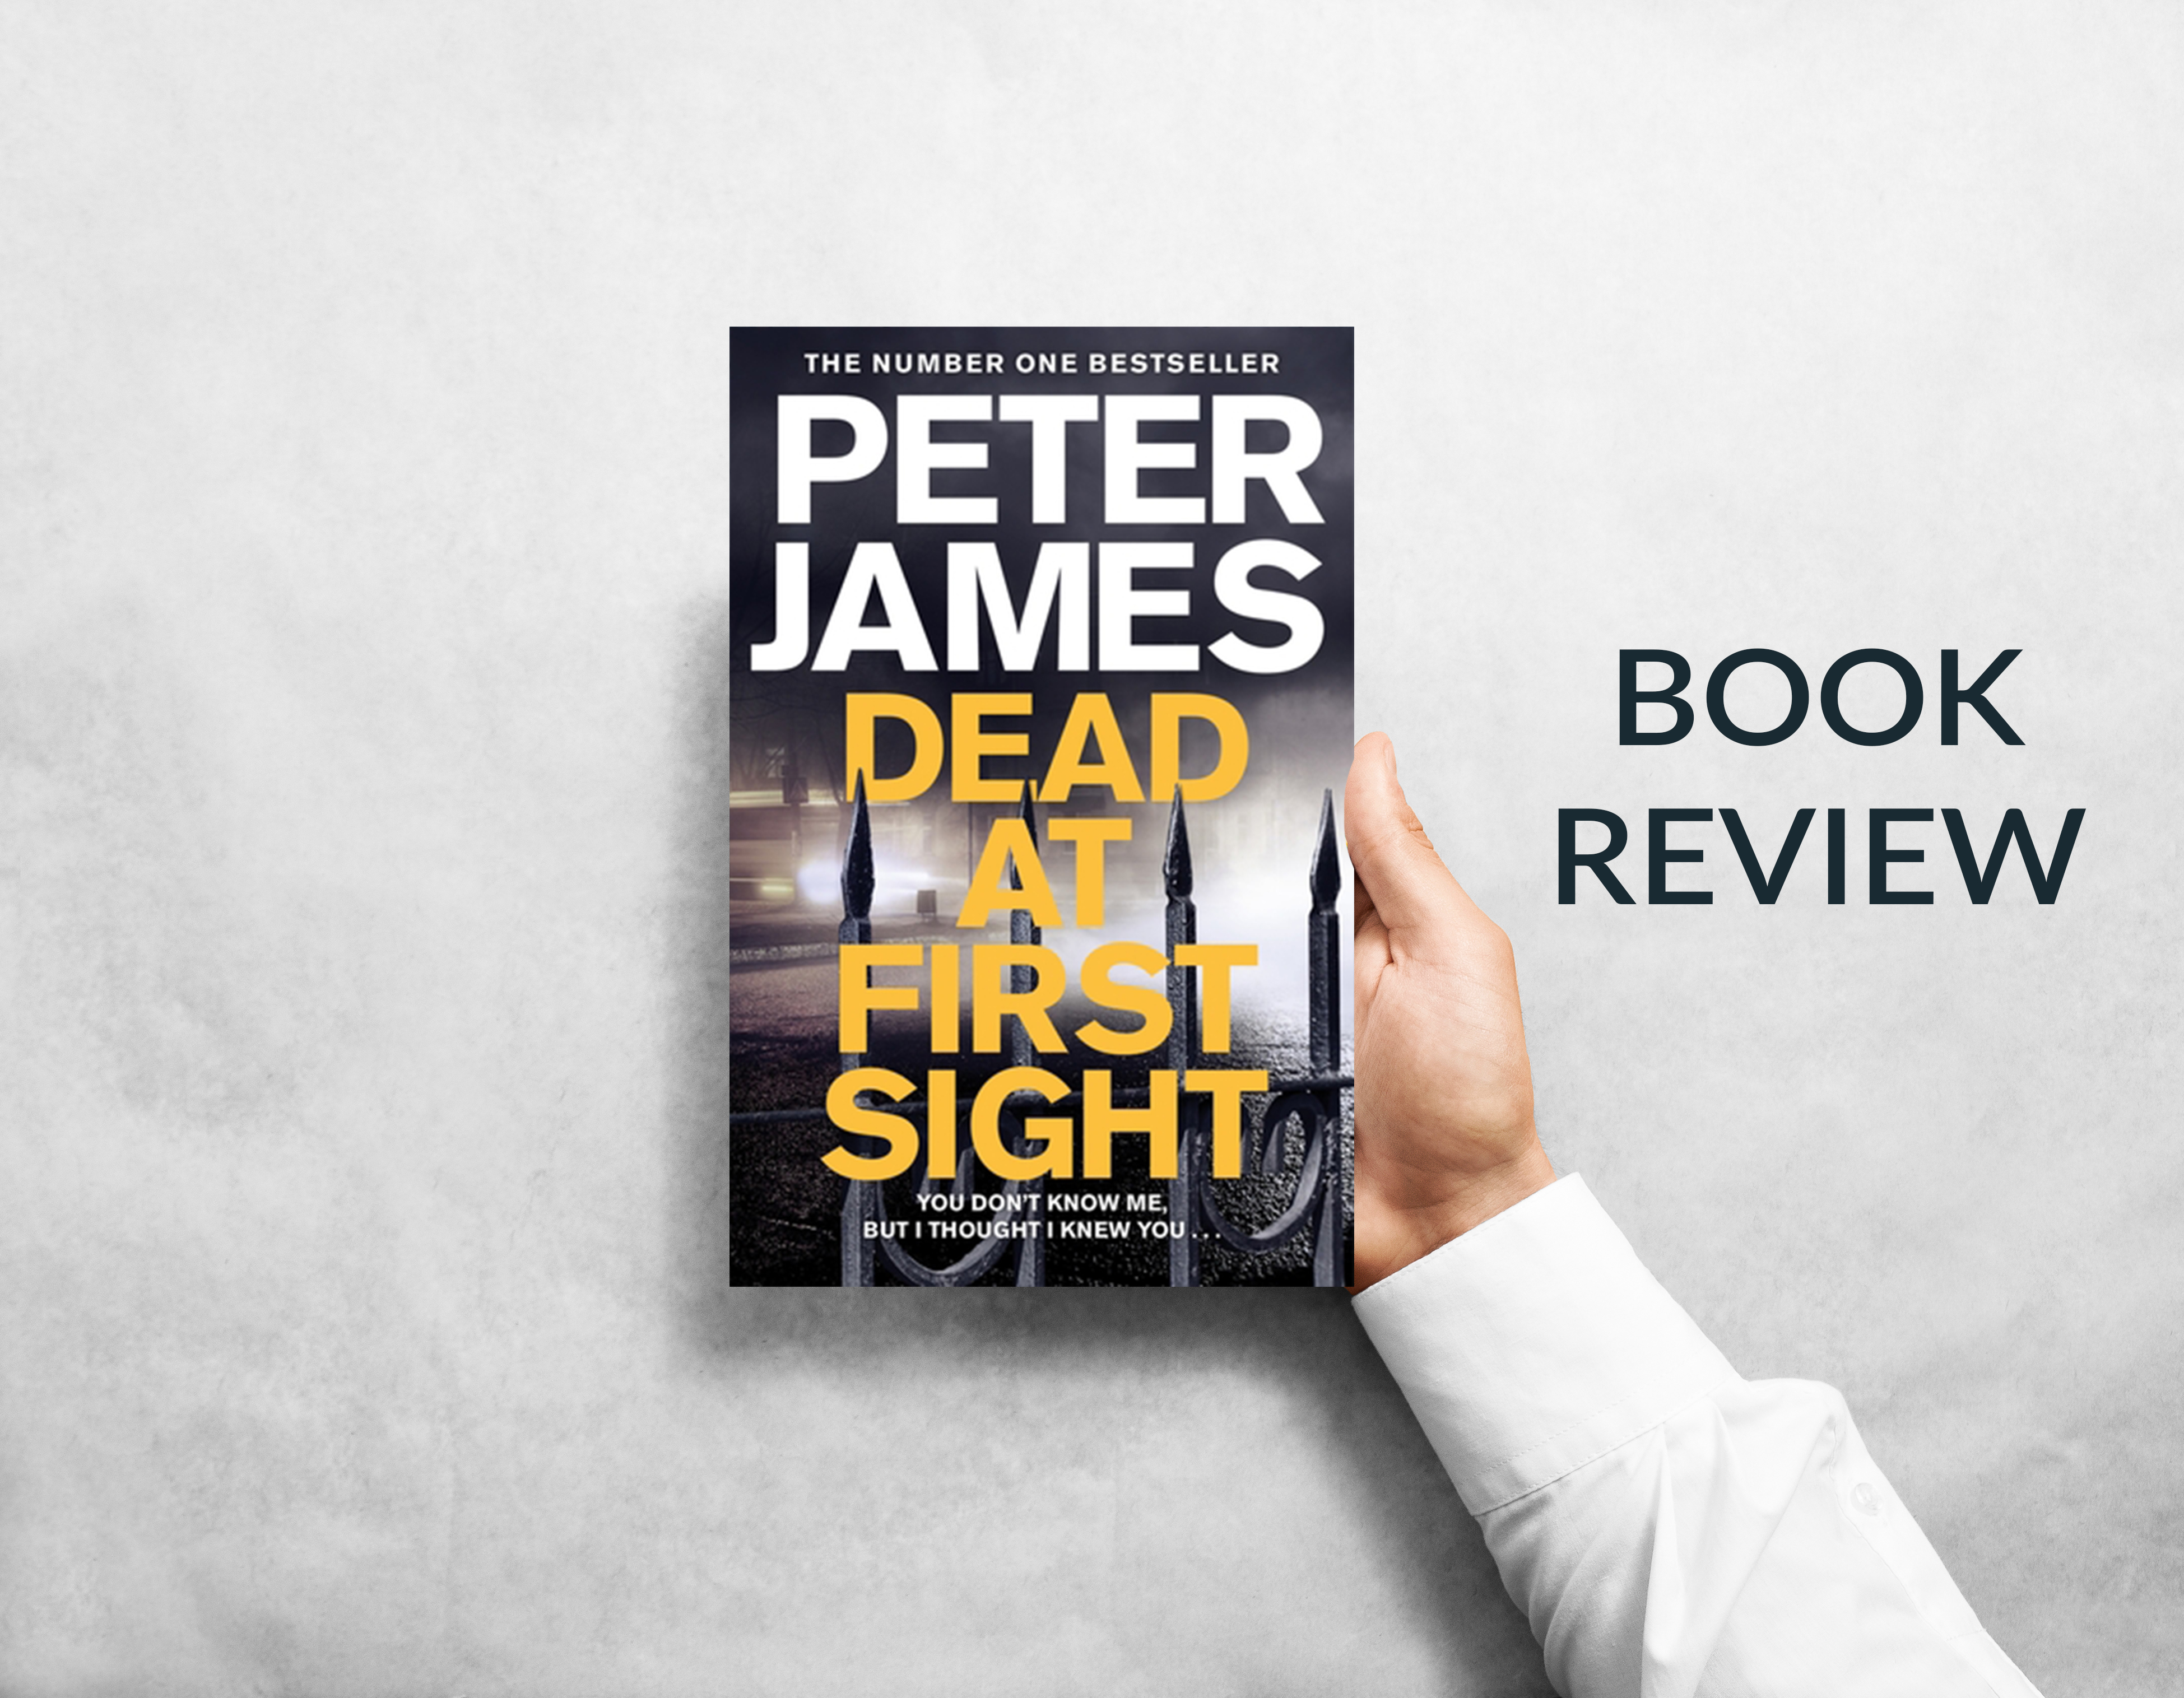 Dead and First Sight by Peter James – Book Review